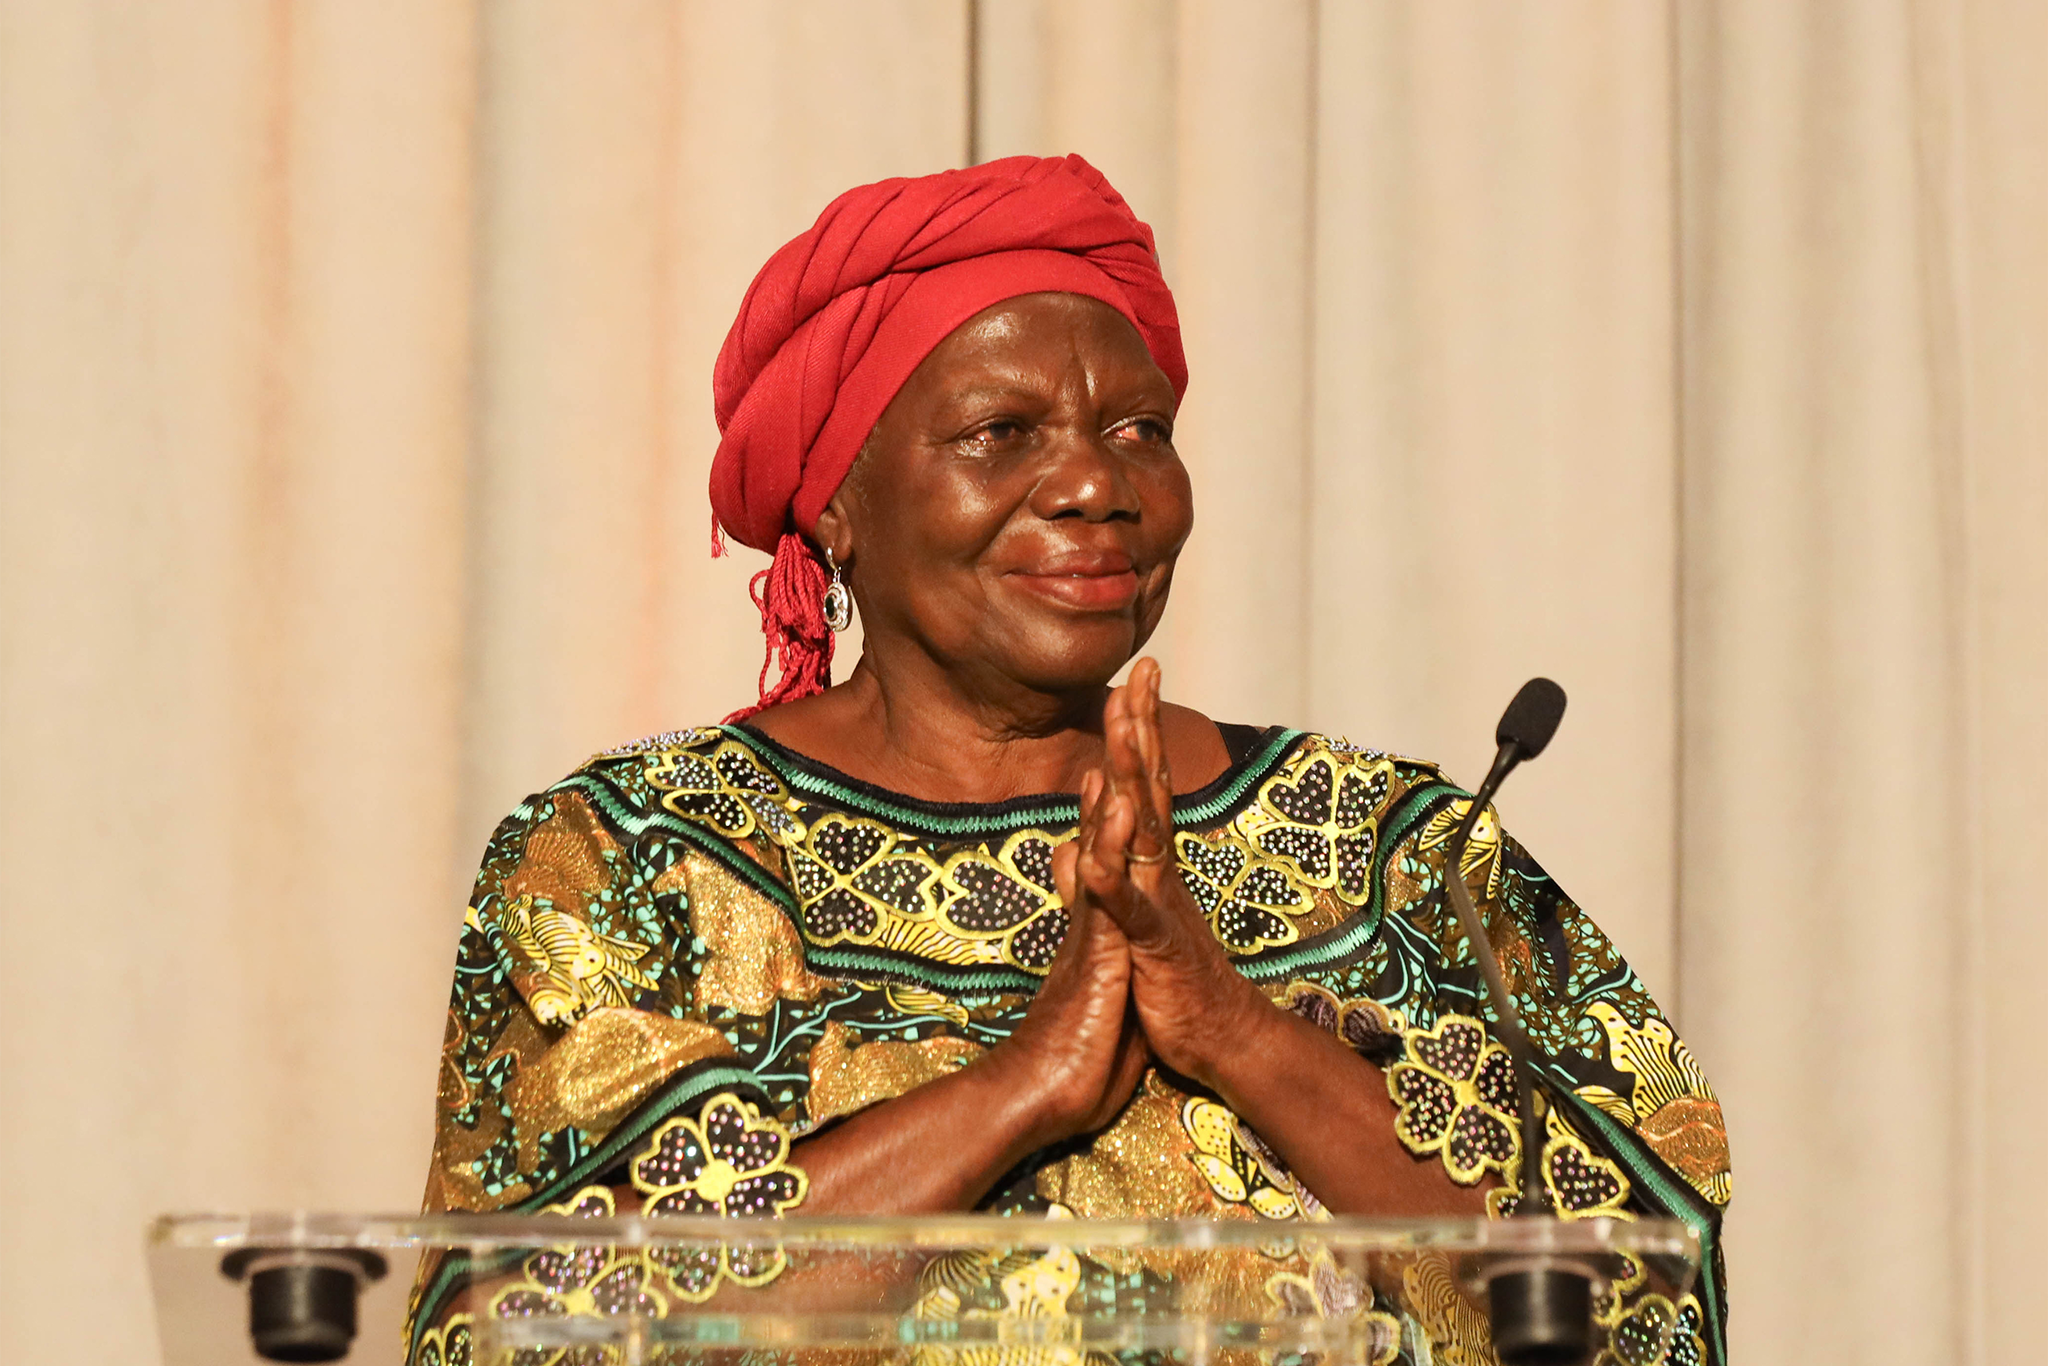 Pétronille Vaweka, USIP’s 2023 Women Building Peace laureate, speaks after receiving the award Feb. 27. She says U.S. leadership is vital to gathering the political will to end the eastern Congo basin wars.